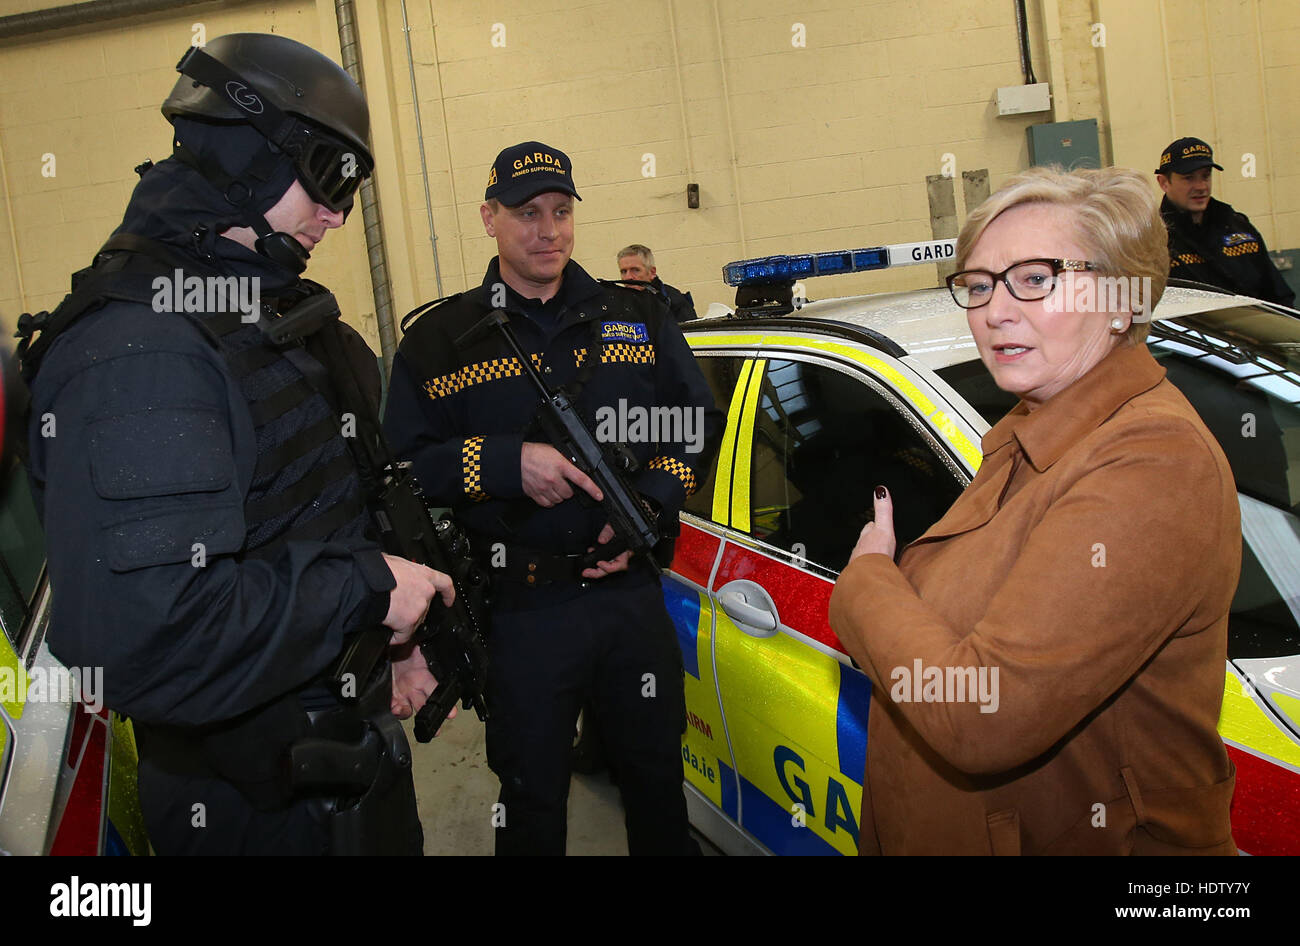 Tanaiste and Minister for Justice Frances Fitzgerald chats with officers as An Garda Siochana launches a new Armed Support Unit (ASU) for the Dublin region at Garda Head Quarters in Dublin. Stock Photo